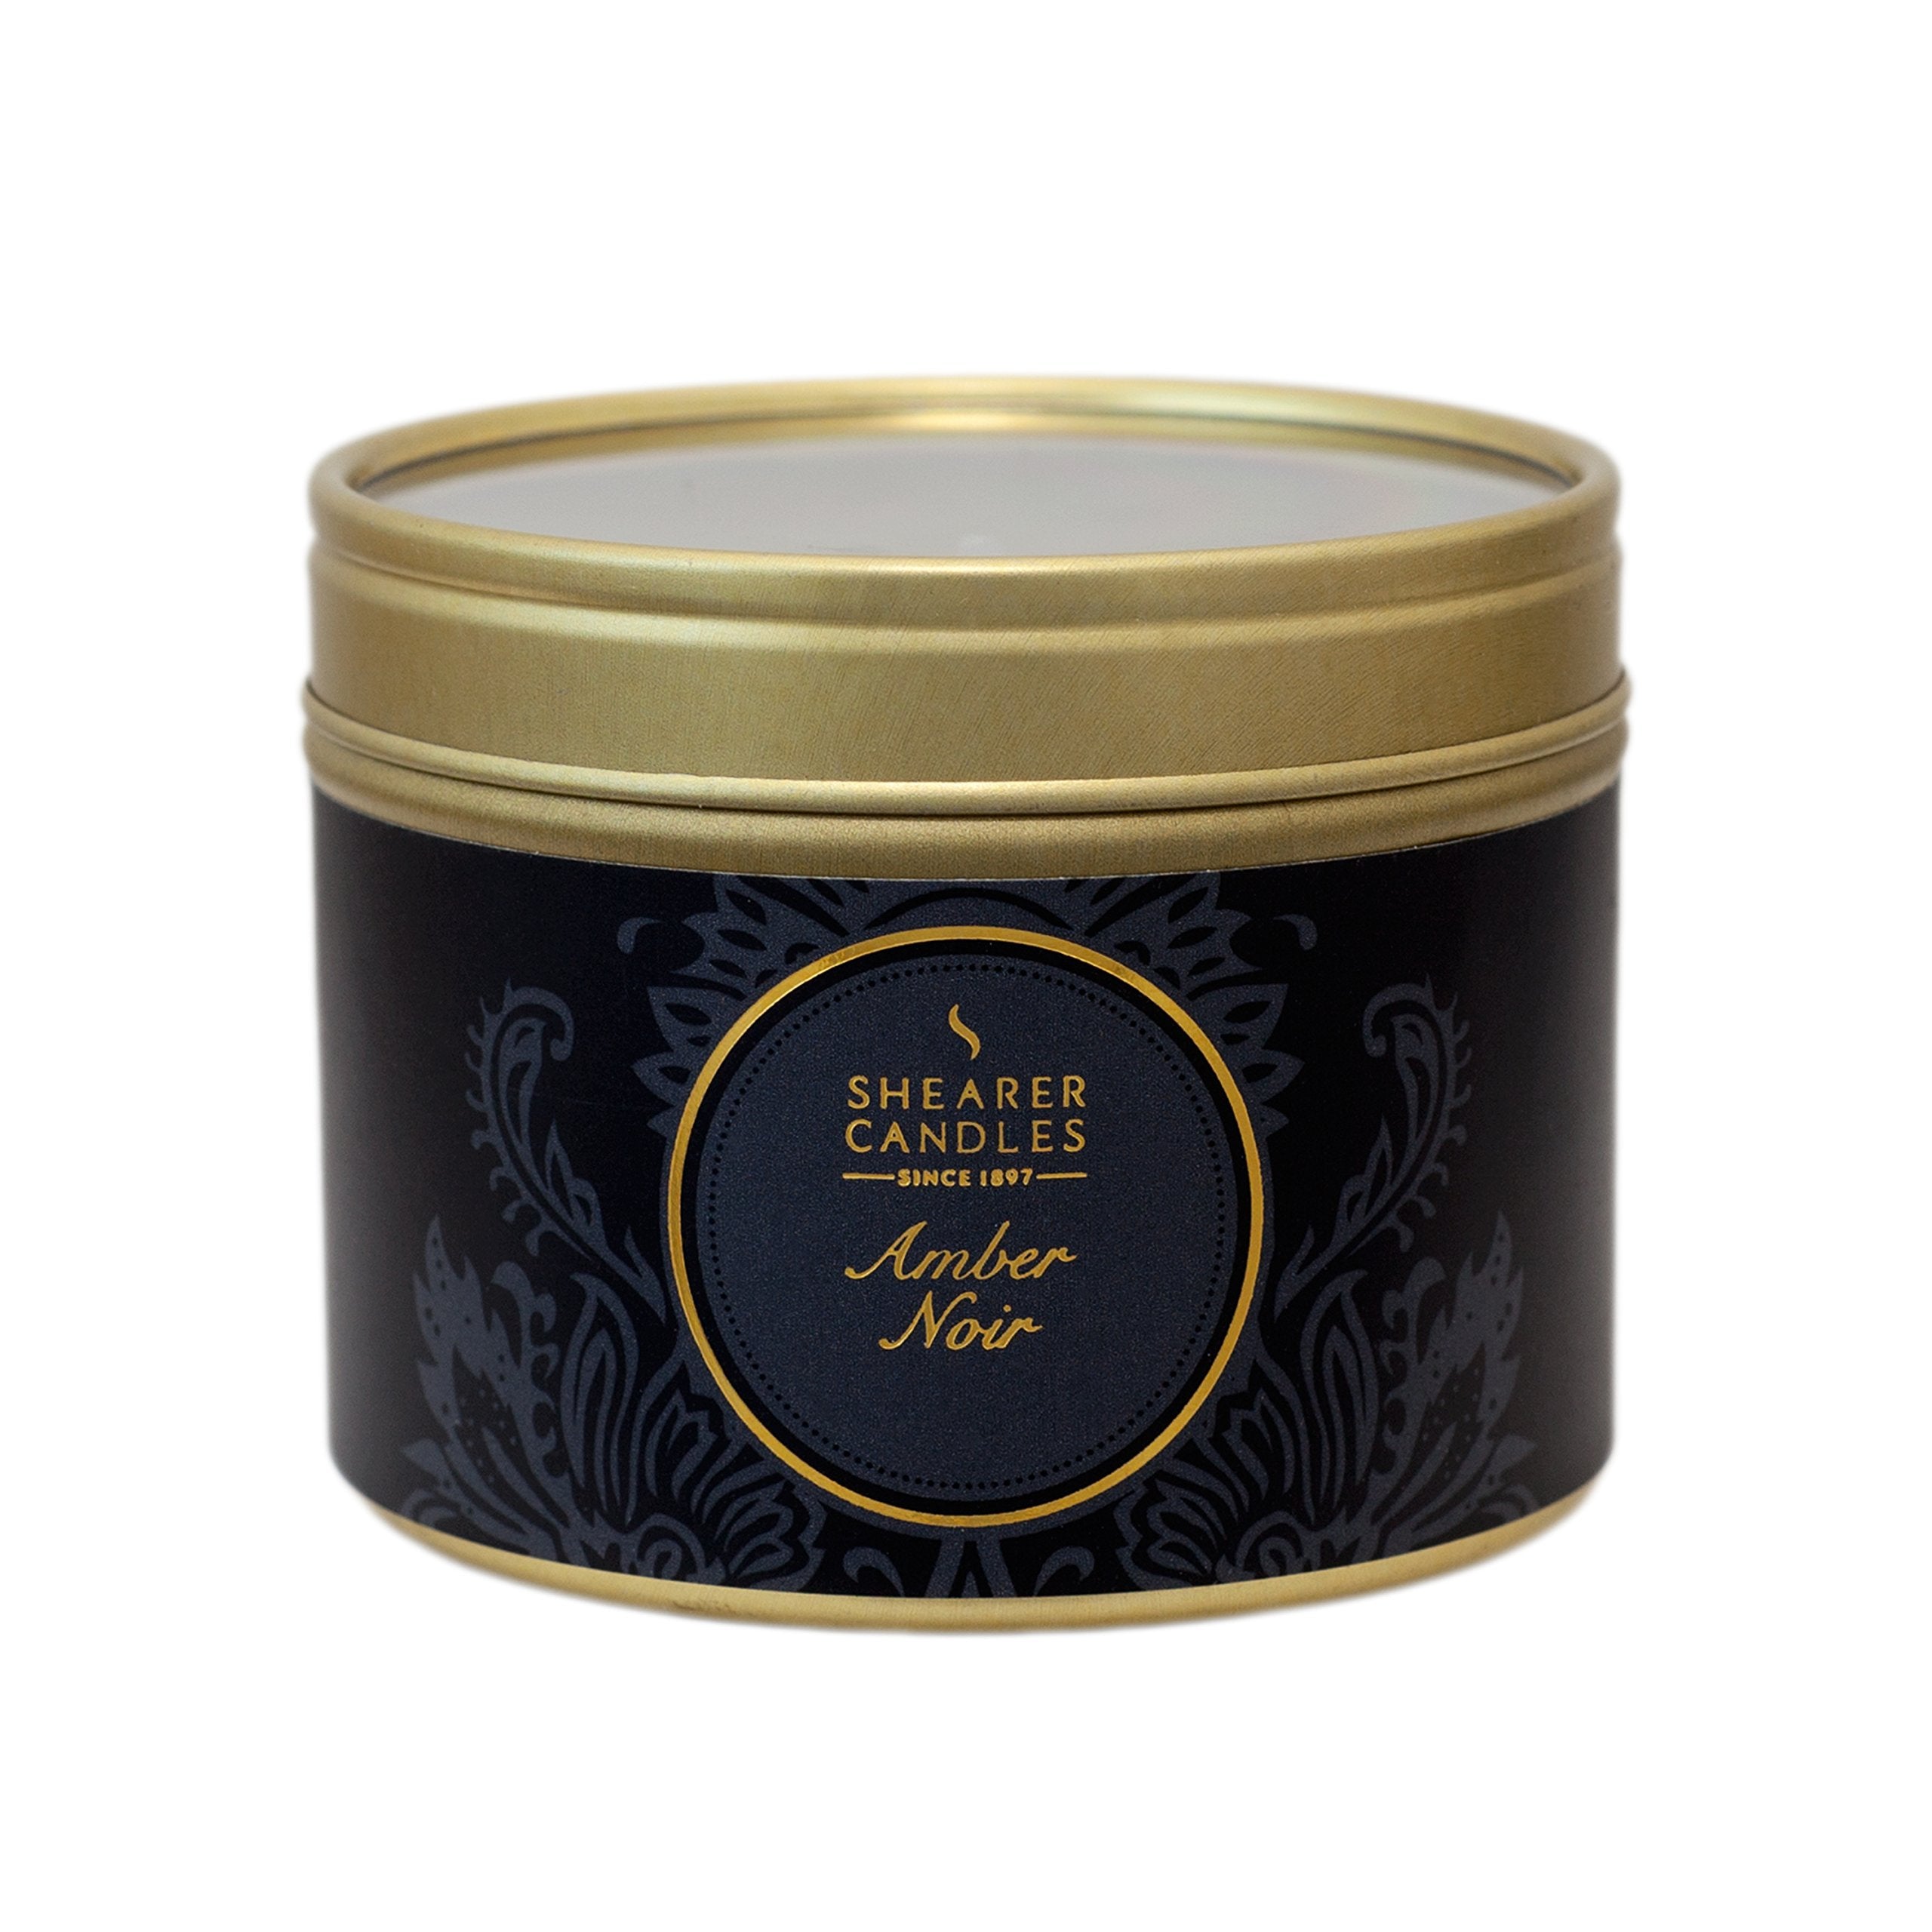 Shearer Candles Amber Noir Small Scented Gold Tin Candle - Black